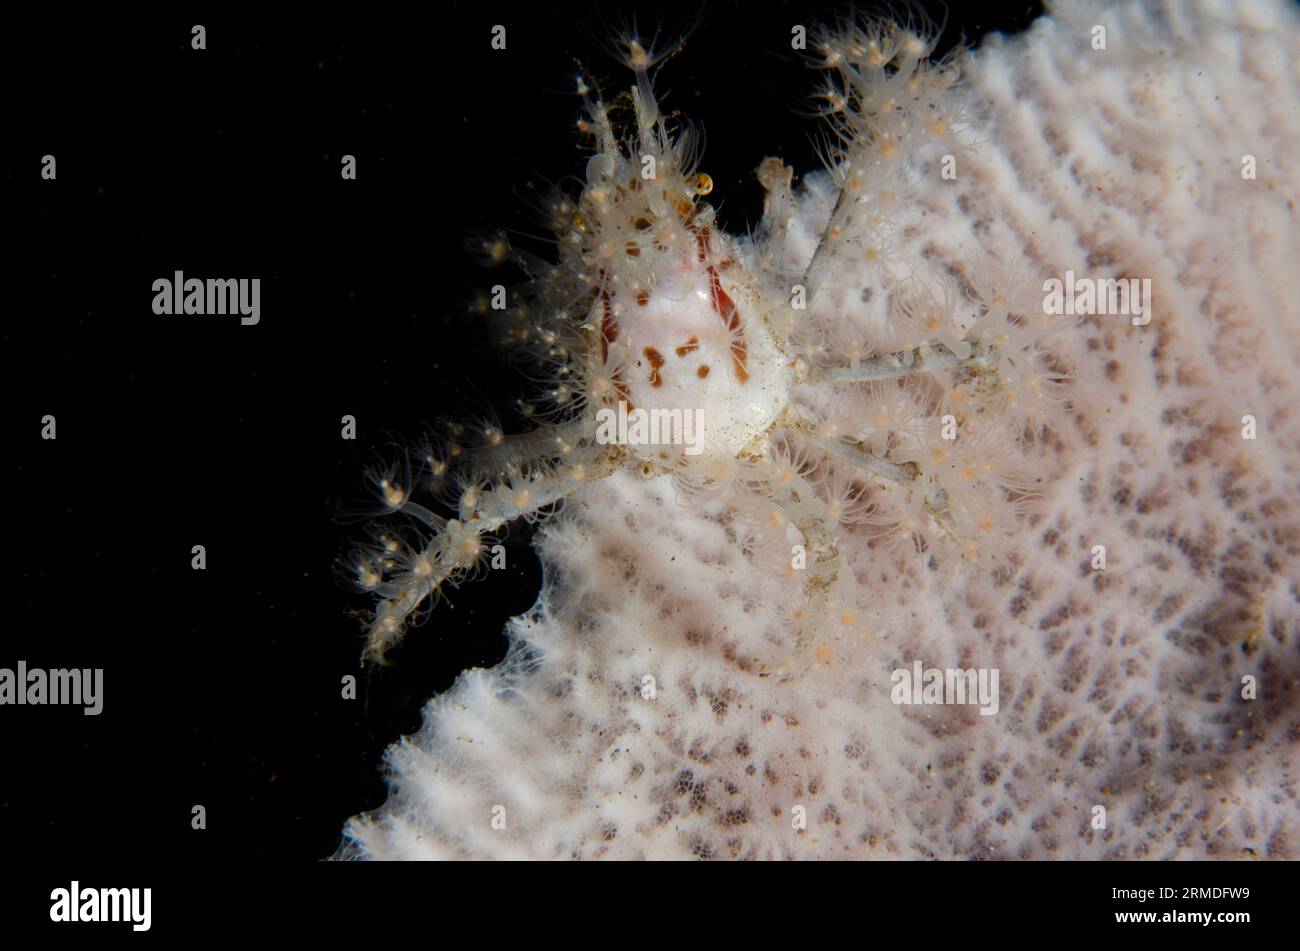 Spider Crab, Achaeus spinosus, carrying small Anemones for protection and camouflage on Sponge, Porifera Phylum, night dive, Scuba Seraya House Reef d Stock Photo